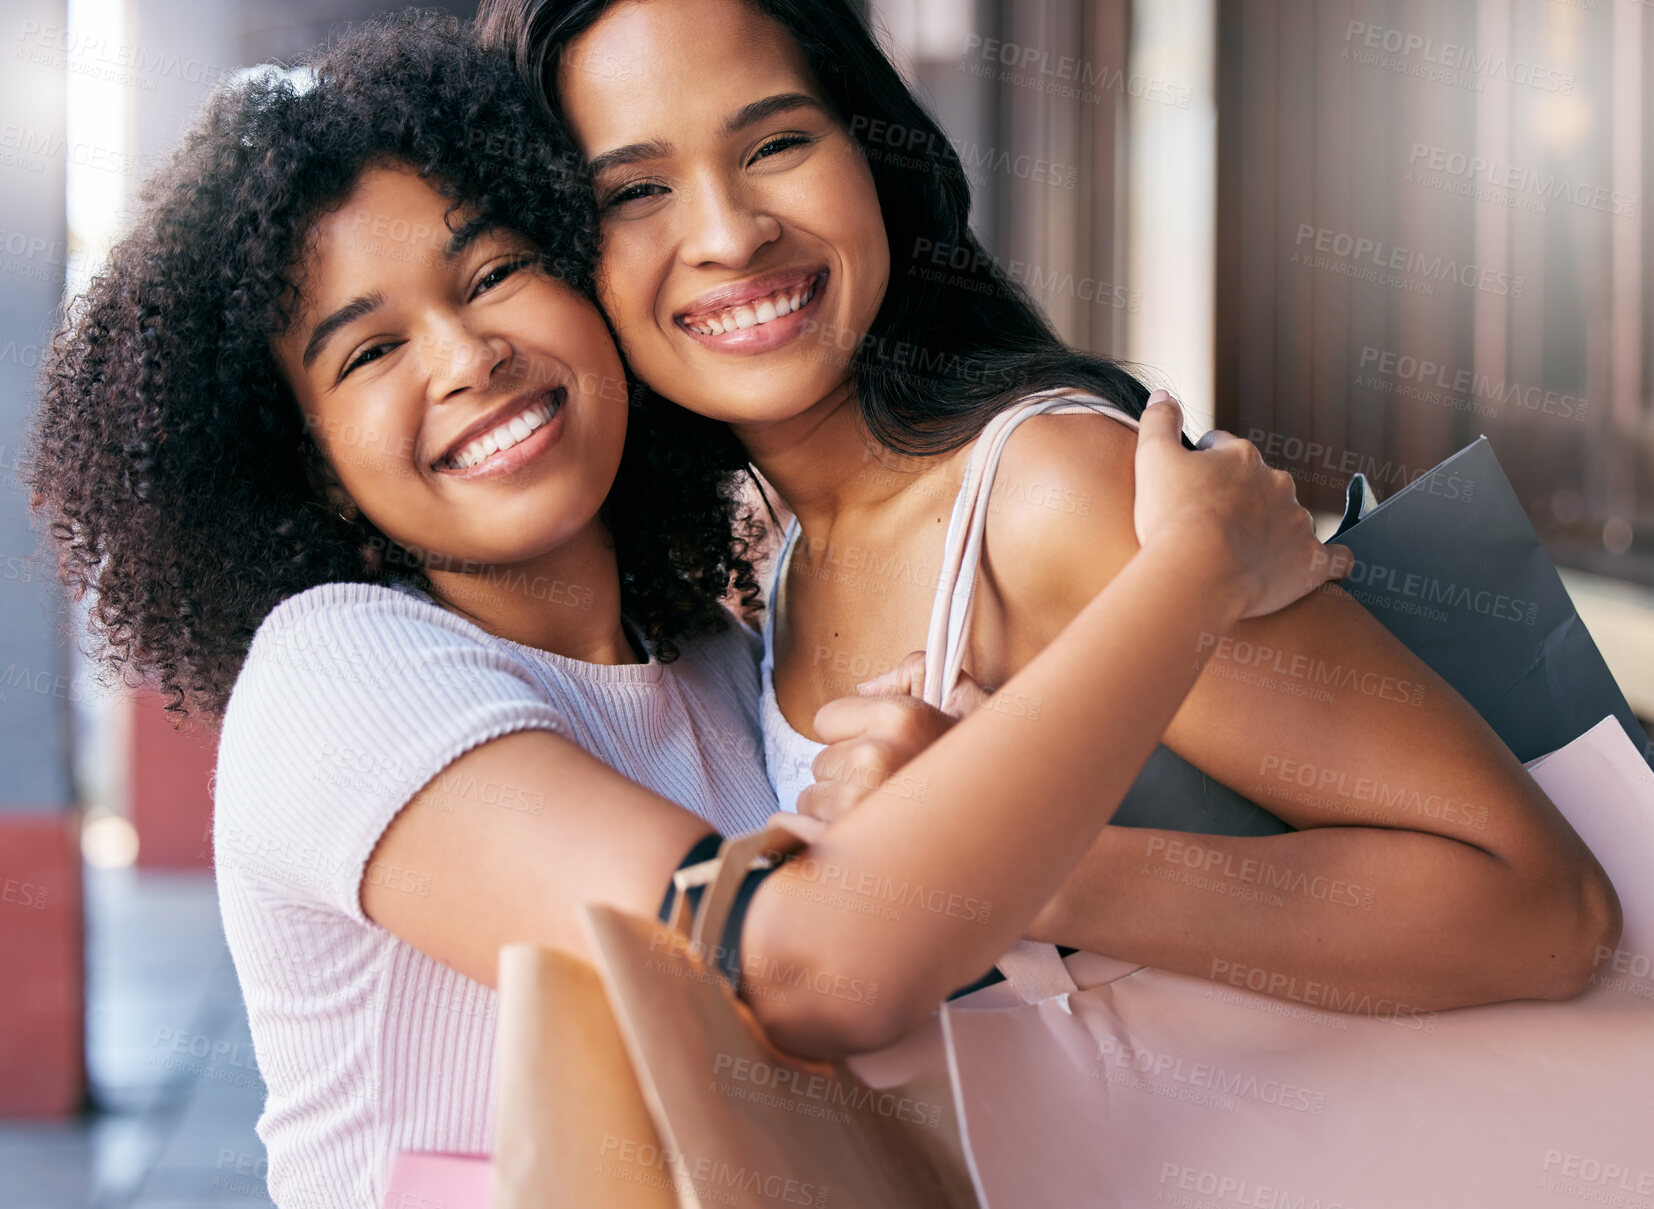 Buy stock photo Happy, friends and hug portrait with shopping bag products for boutique purchase fun in New York, USA. Smile, care and appreciation in women friendship with black people enjoying shopping spree.

